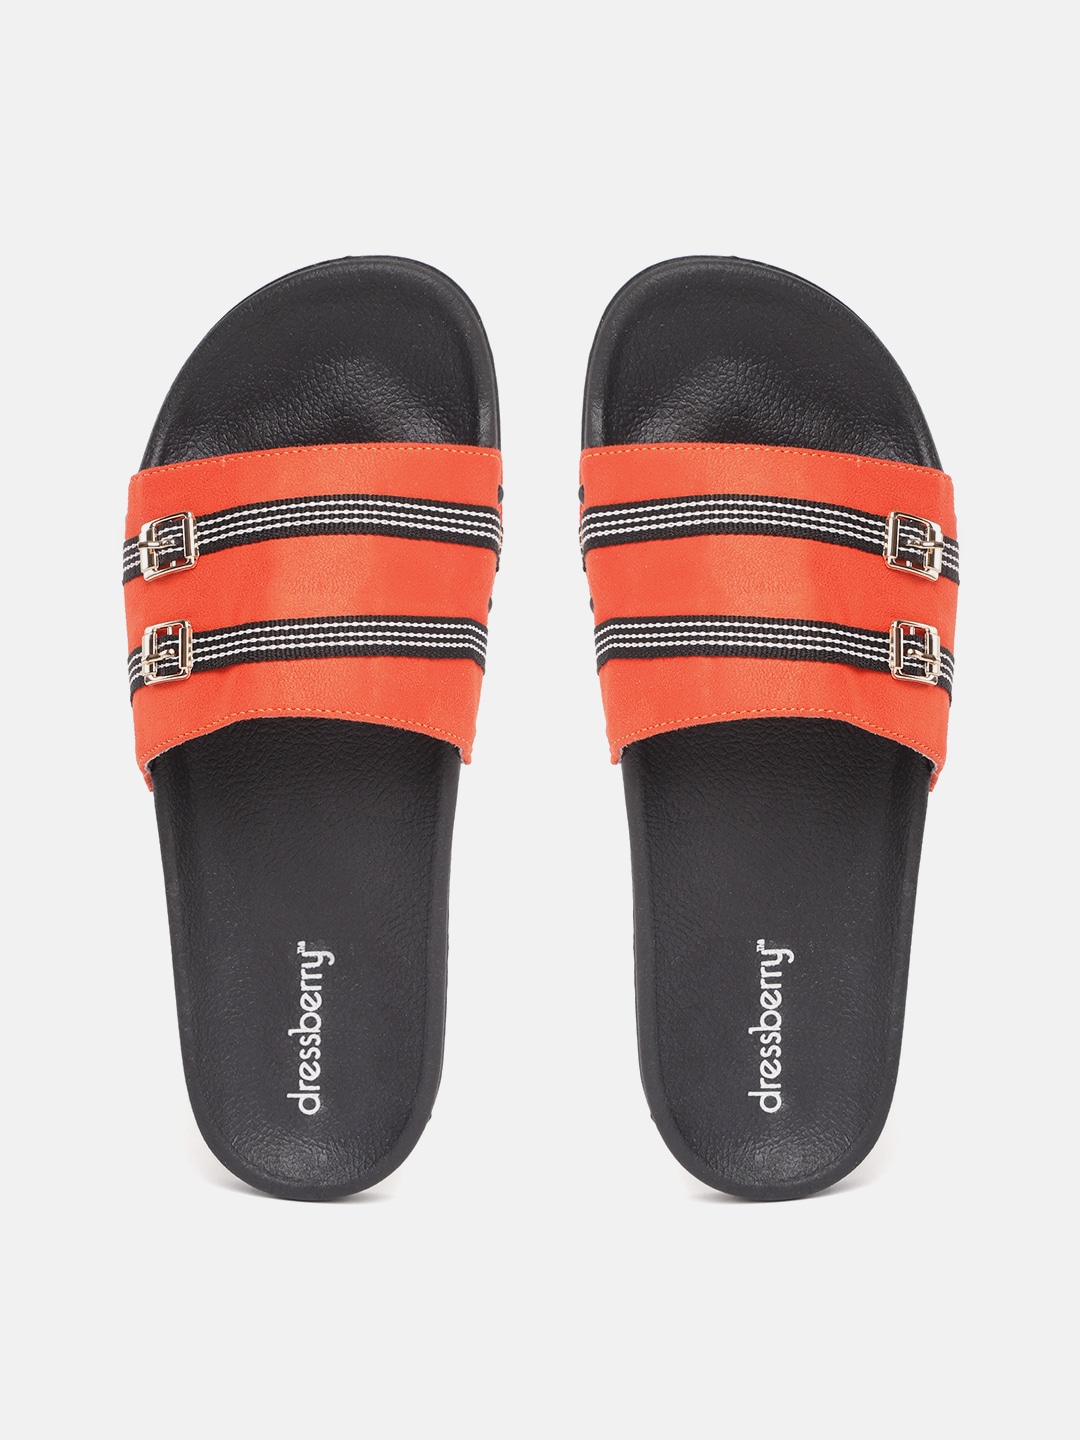 DressBerry Women Coral Orange & White Striped Flip Flops with Buckle Detail Price in India